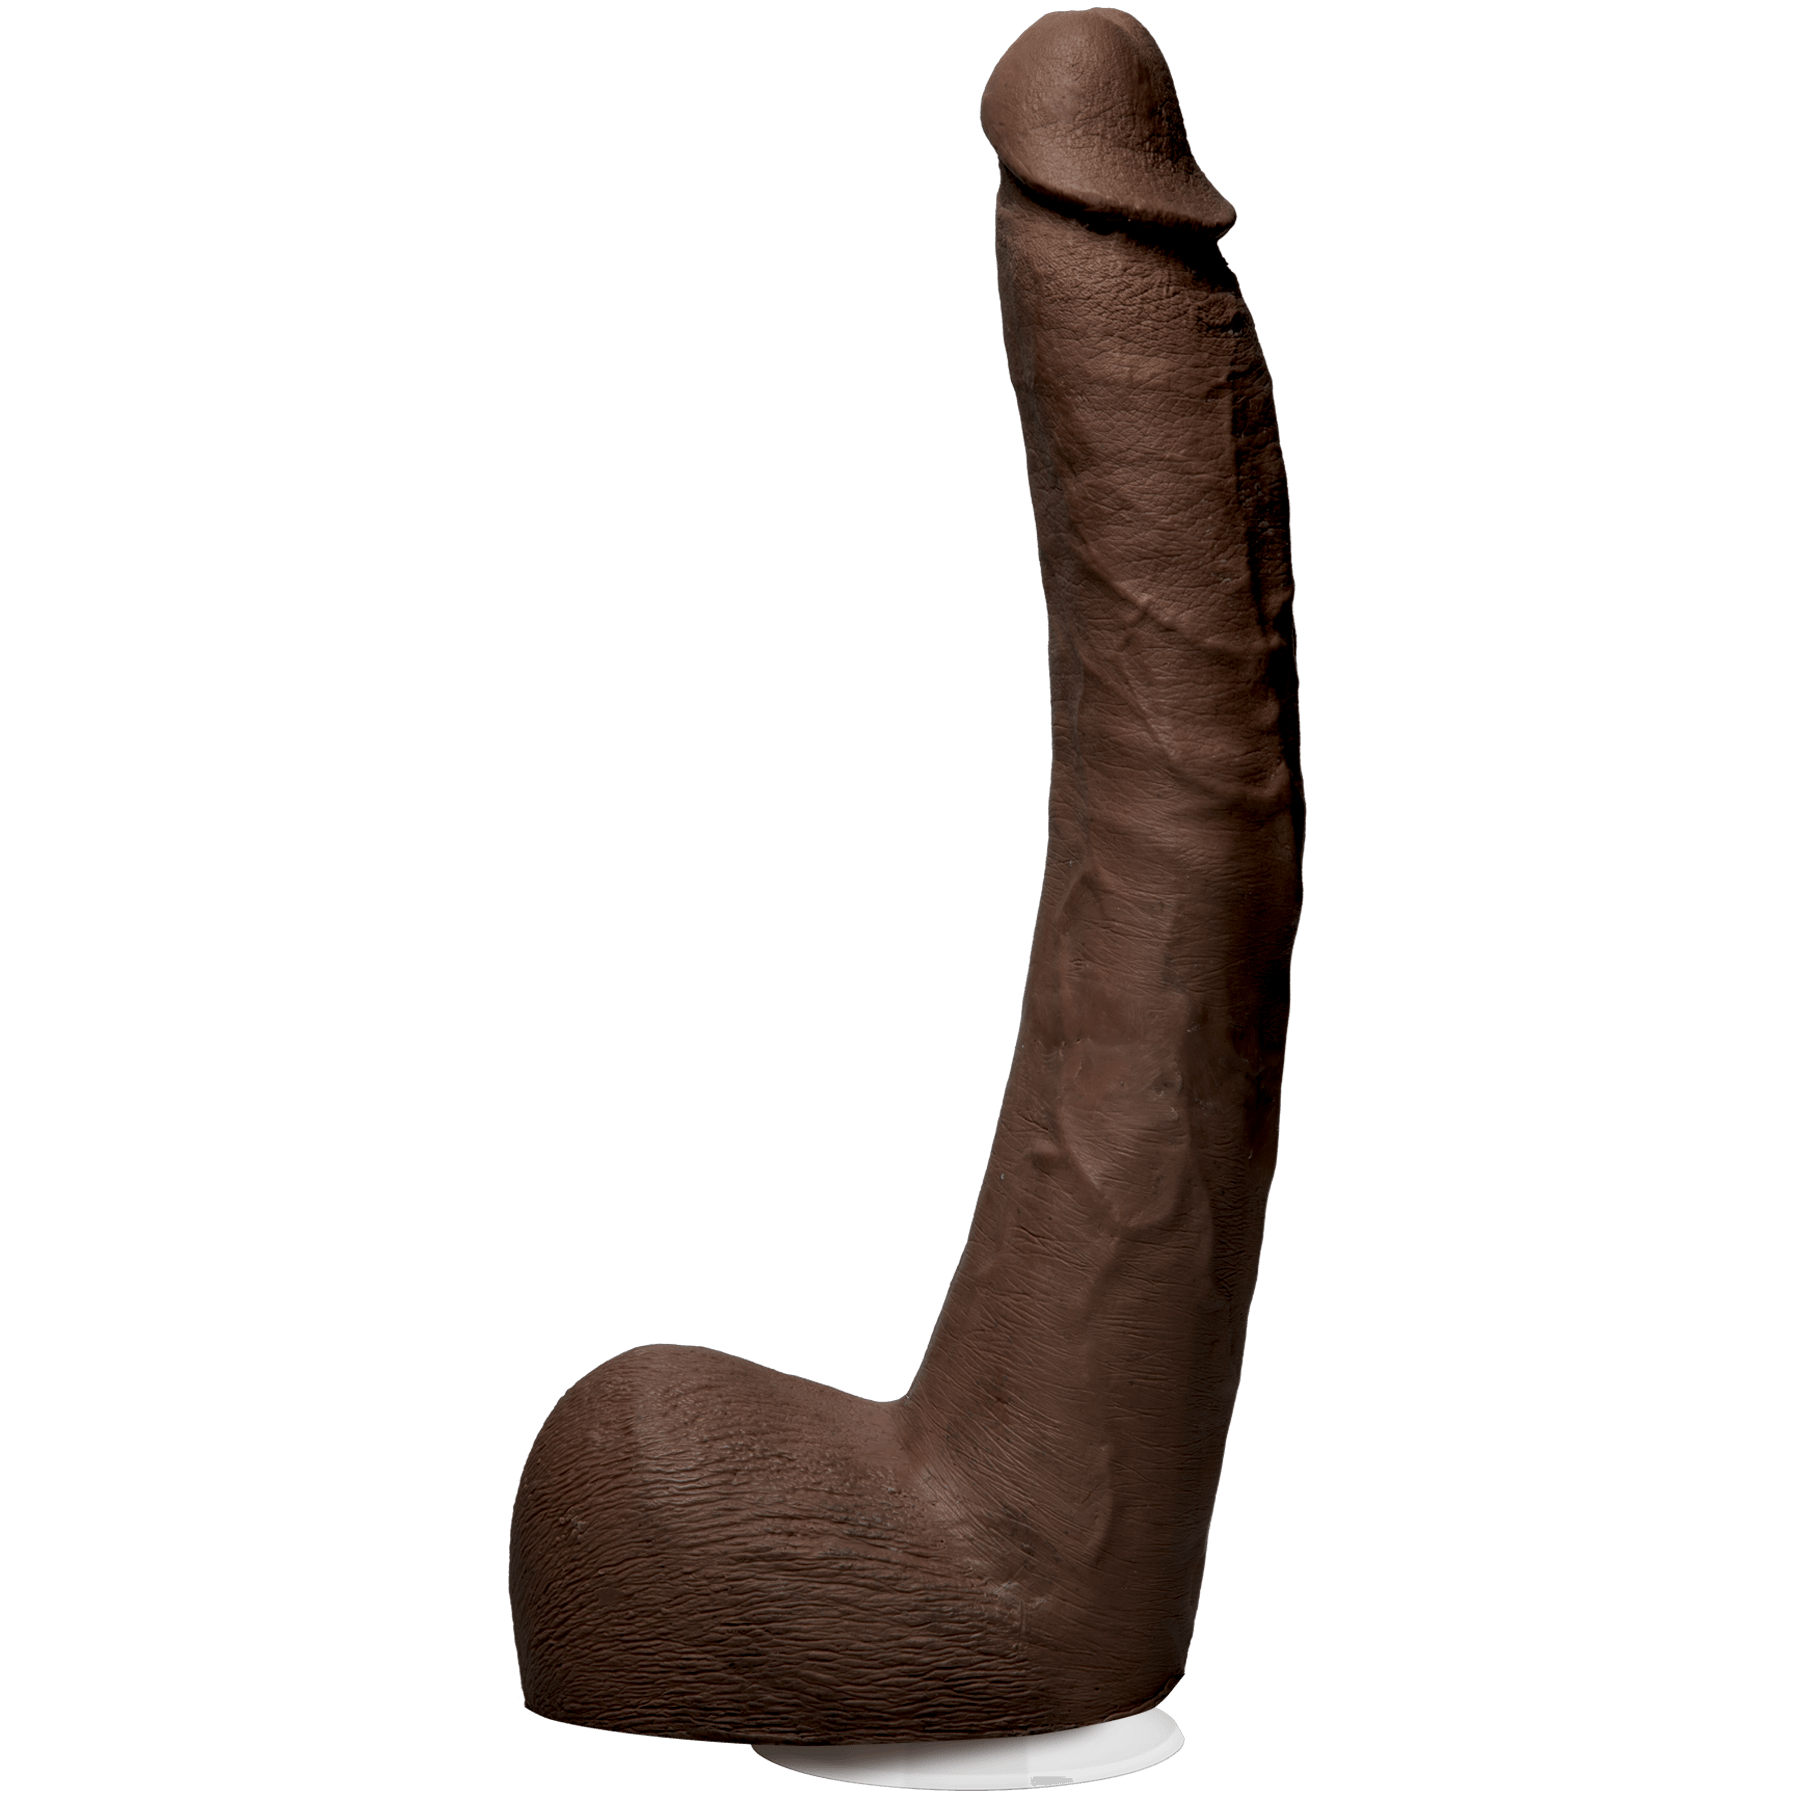 Doc Johnson Signature Cock Isiah Maxwell 10in Cock - Buy At Luxury Toy X - Free 3-Day Shipping